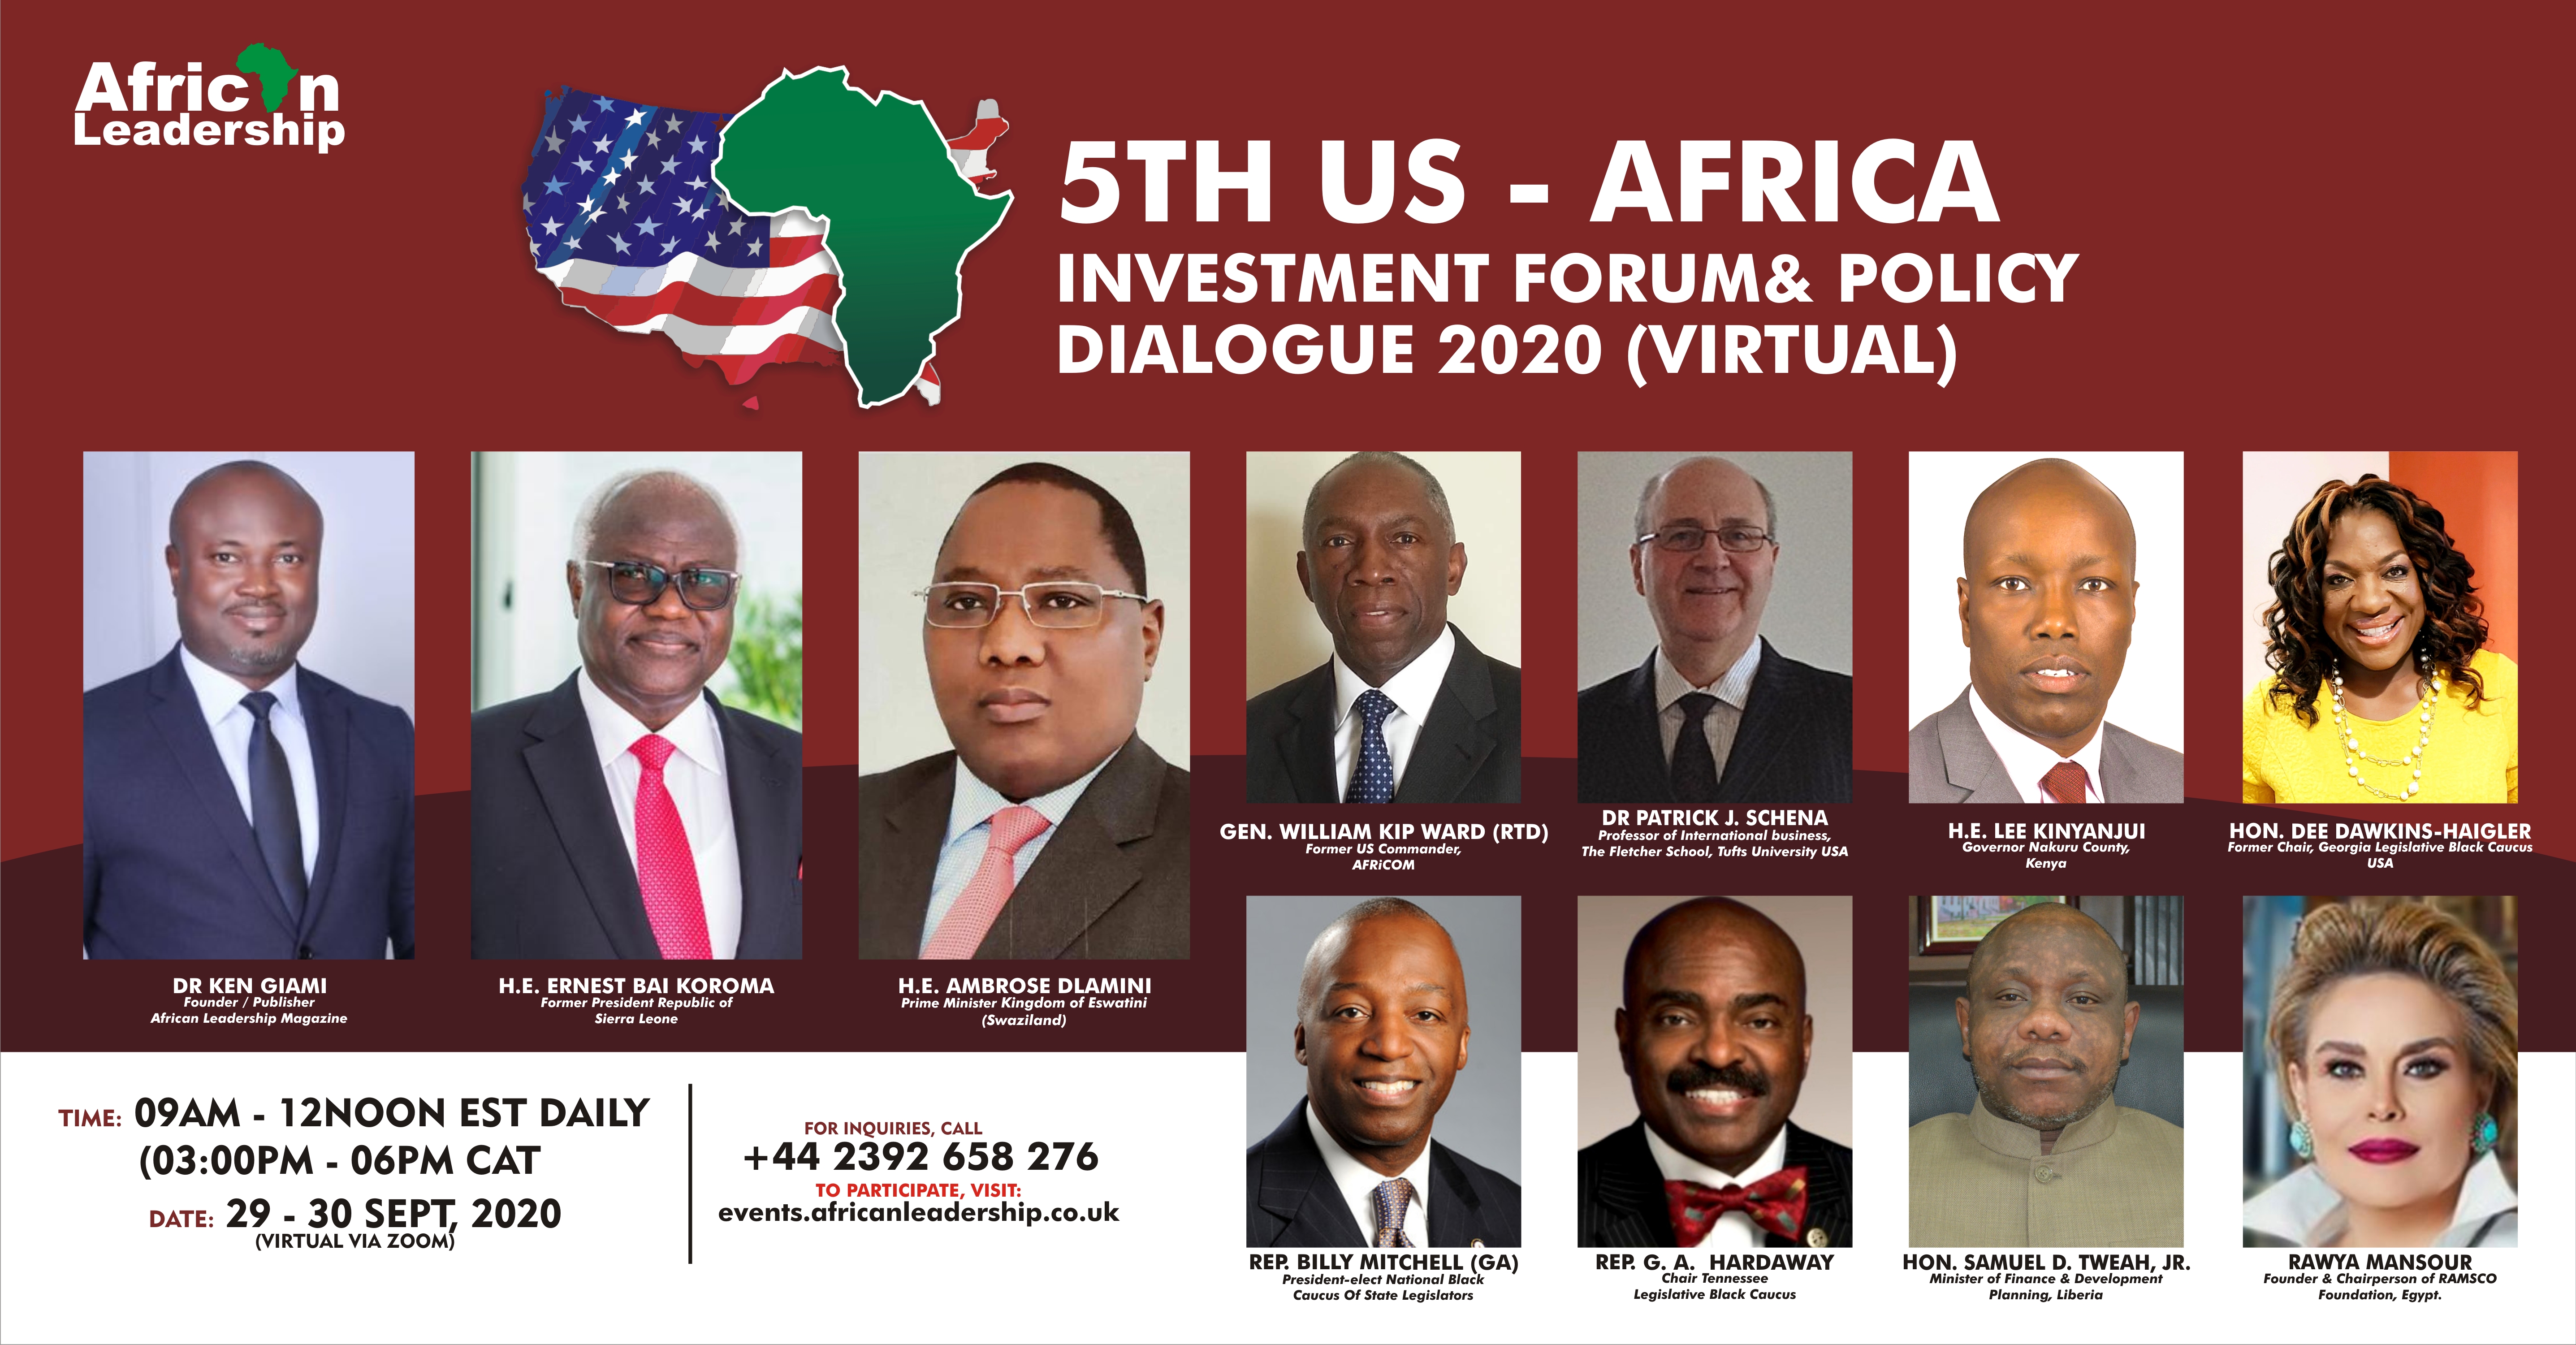 Prime Minister Dlamini, President Koroma, US General Ward, NNPC Kyari, others confirmed for African Leadership magazine’s US – Africa Investment Forum and Policy Dialogue 2020